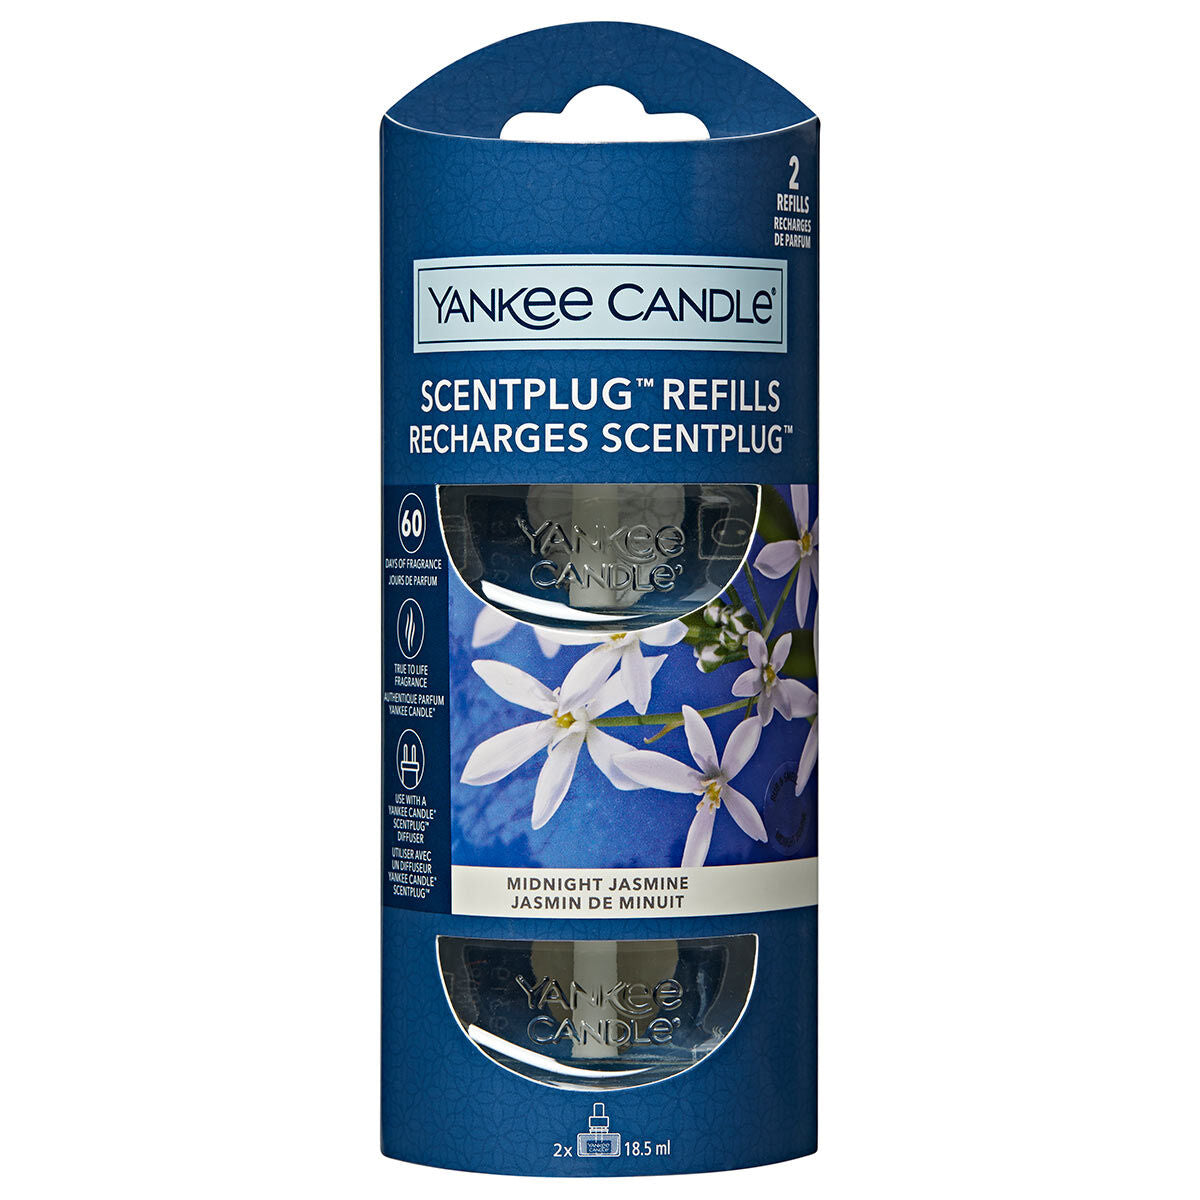 Yankee Candle Midnight Jasmine Scent Plug Refill Twin Pack